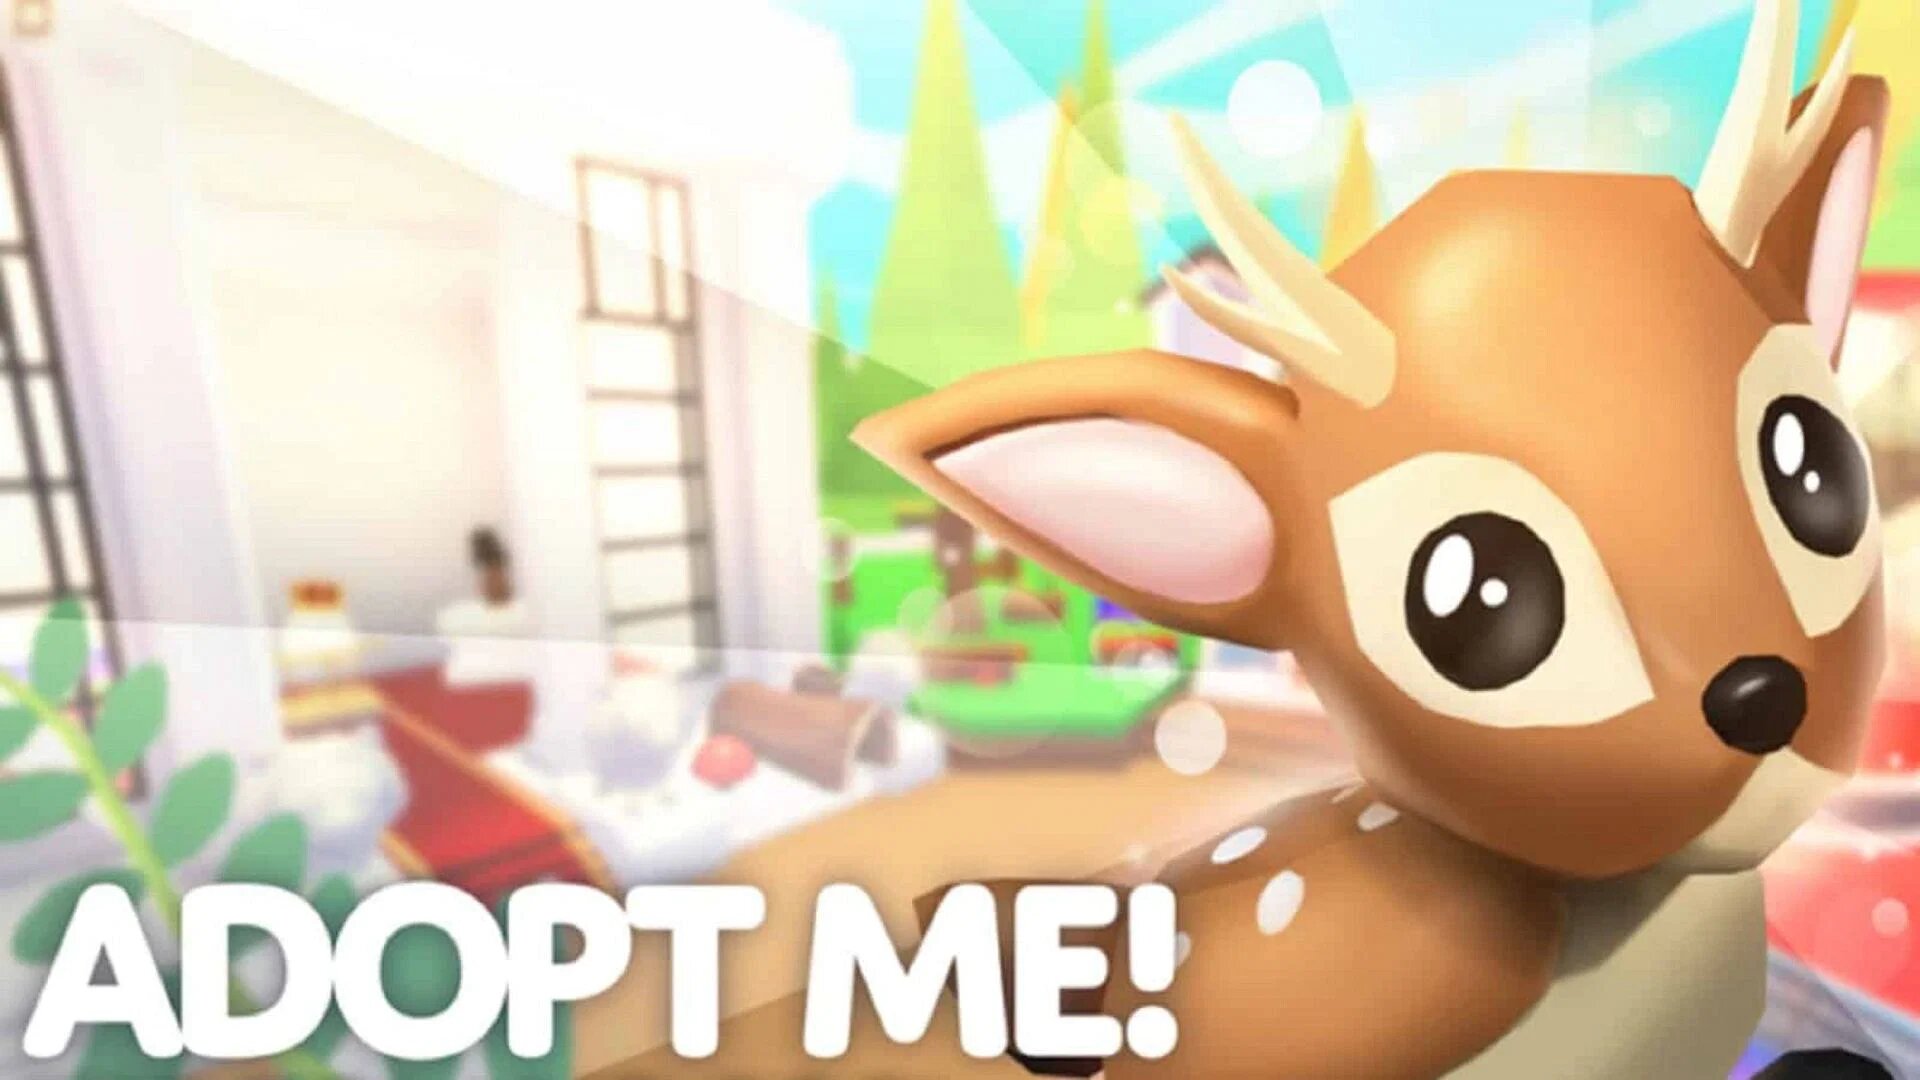 i keep on getting stuck in this loading save area and cannot get into  adopt me anymore do u guys have any solutions? pls tell me :( :  r/AdoptMeTrading